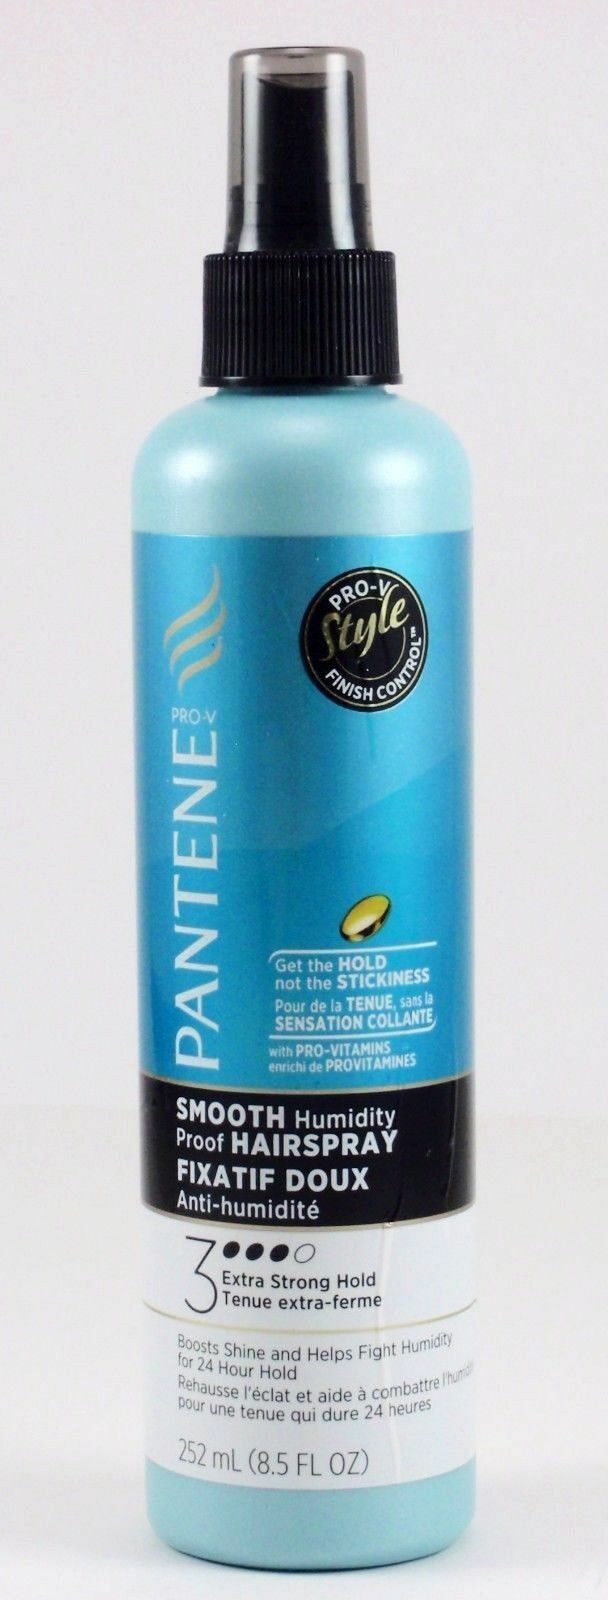 New Pantene Pro V Smooth Humidity Proof Hairspray #3 Extra Strong Hold 8.5 Oz.